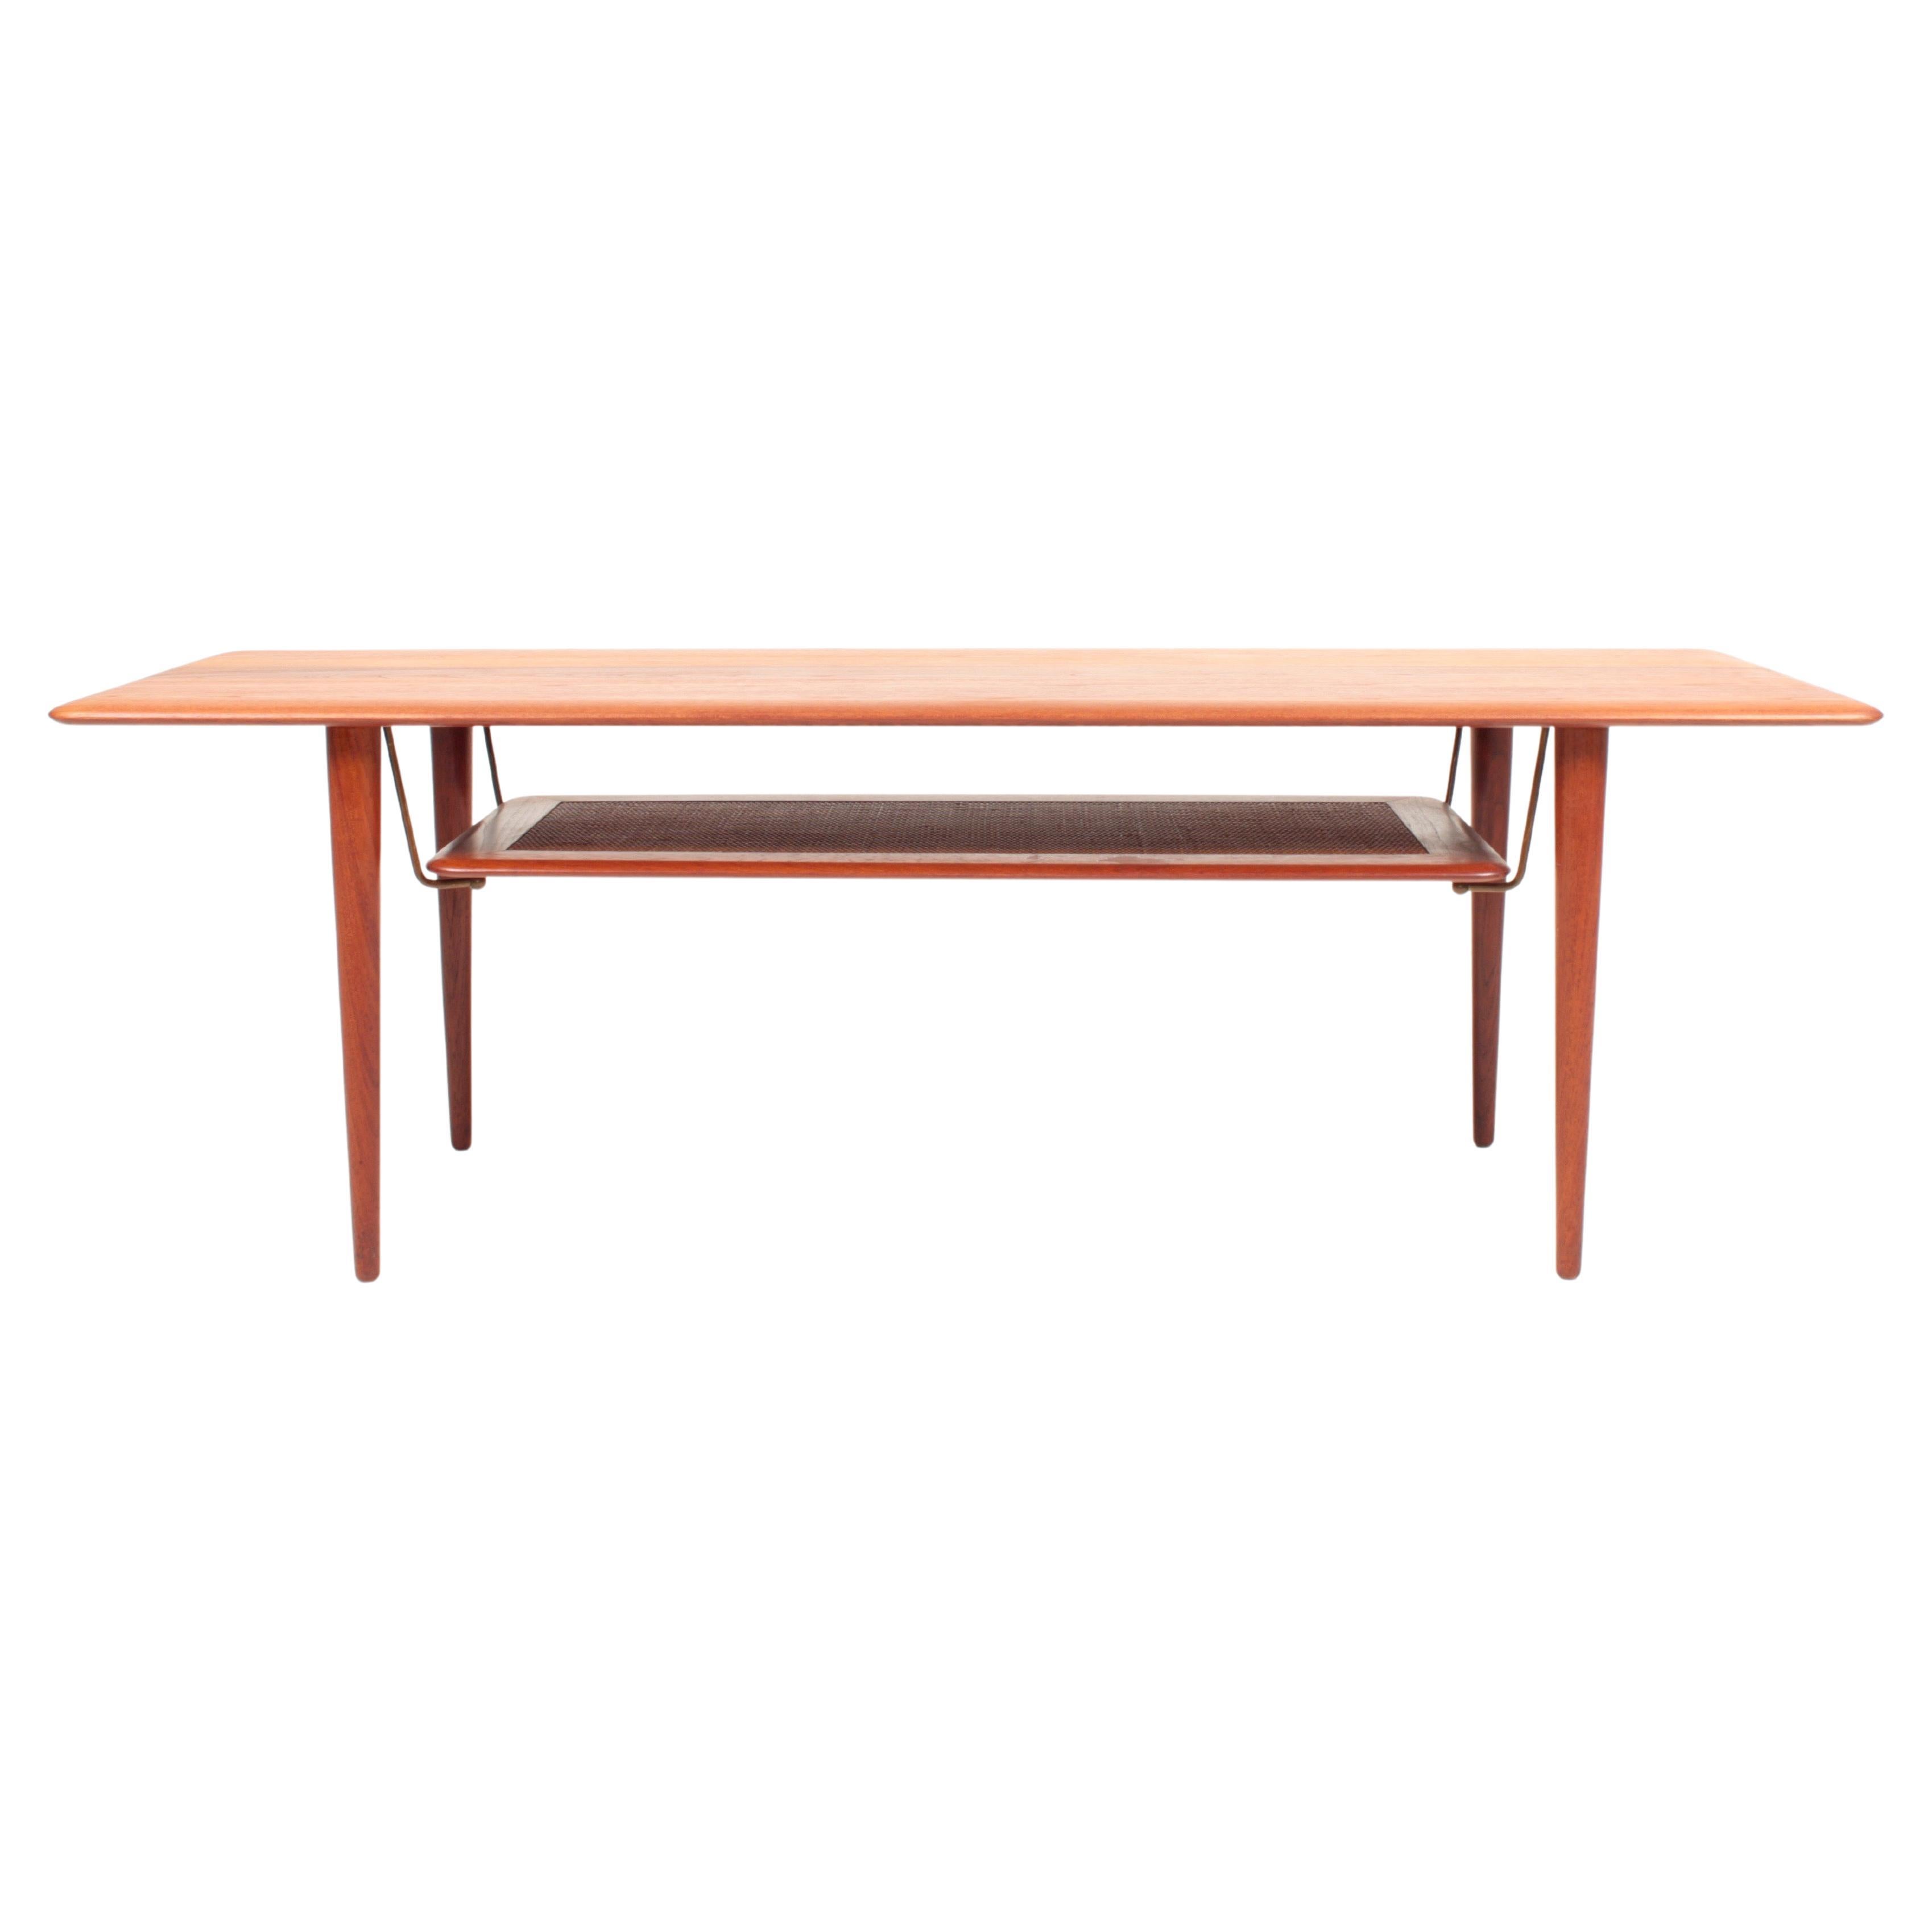 Midcentury Low Table in Solid Teak and Cane by Hvidt & Mølgaard, Made in Denmark For Sale